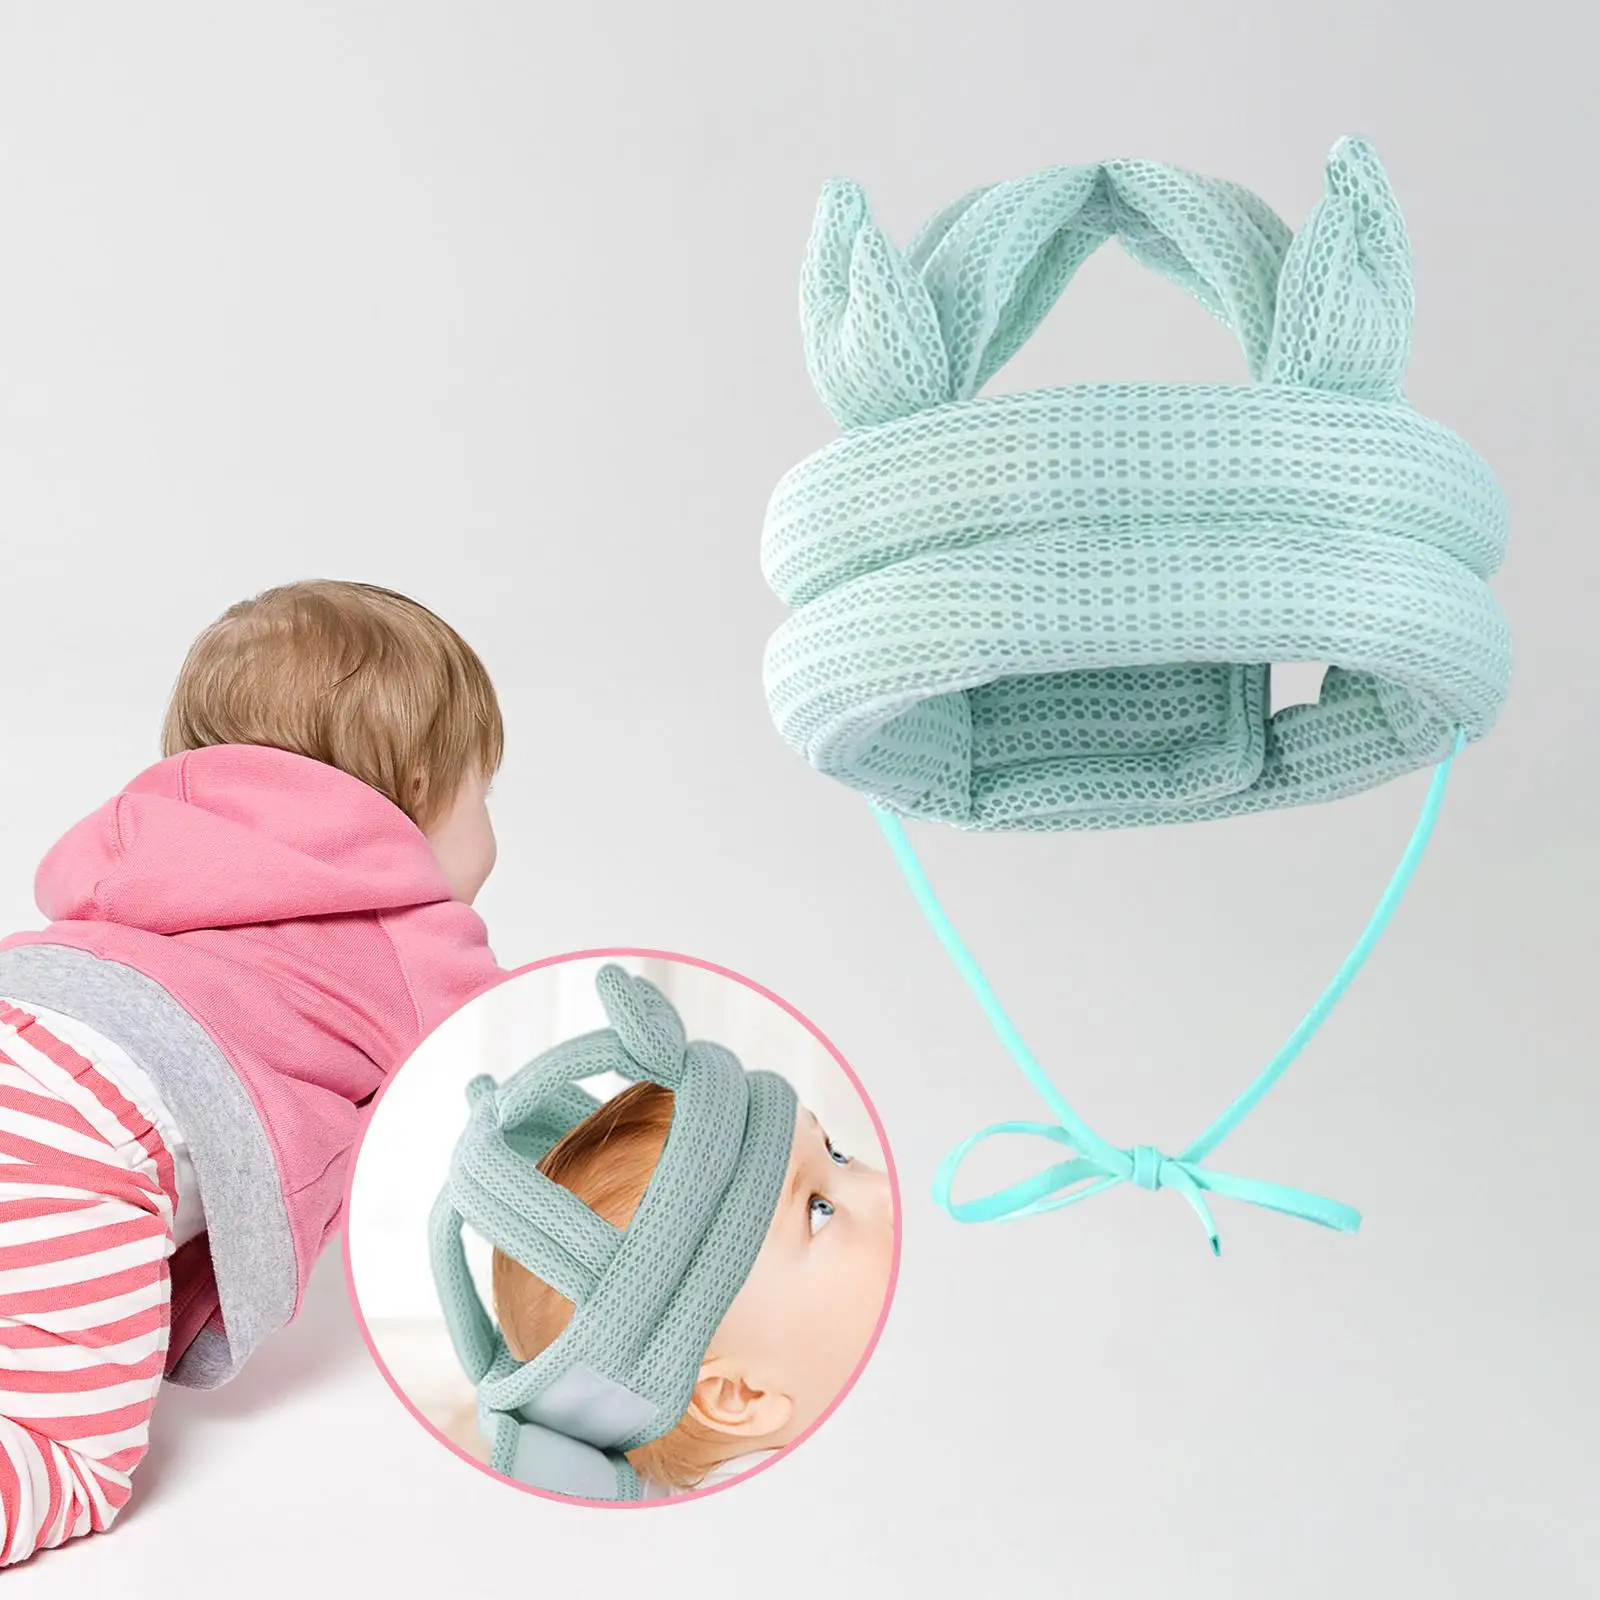 Head Protector Adjustable Kids Soft Head Cushion Baby Protective Harnesses Cap for Children Infant Crawling Walking Playing